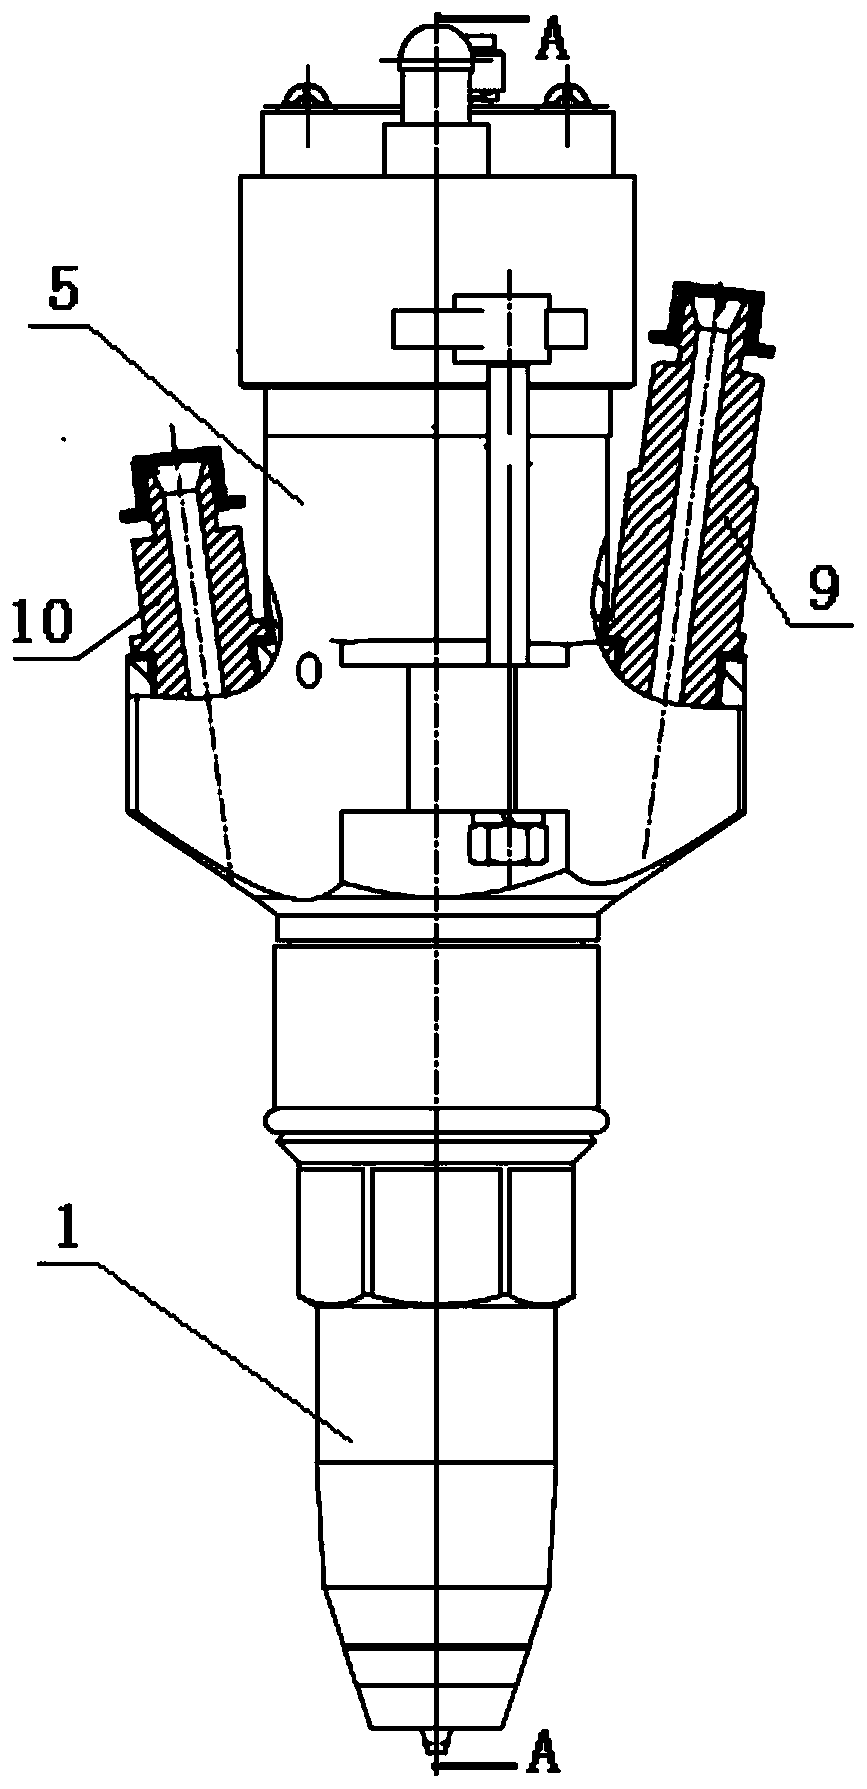 A fuel injector integrating an electronically controlled unit pump